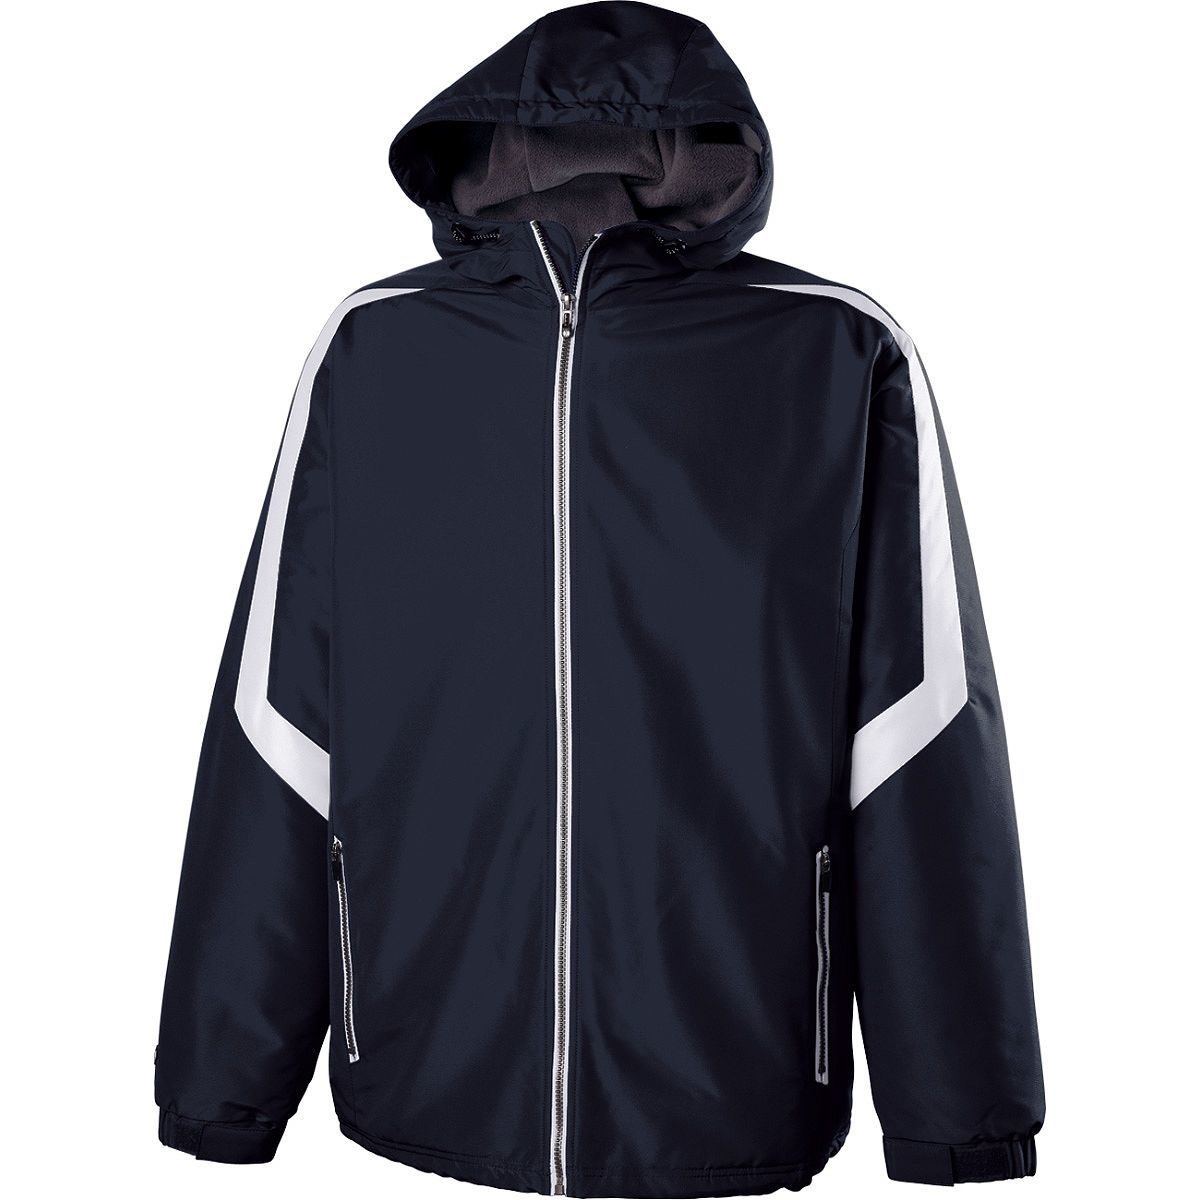 Holloway Sportswear 4XL Charger Jacket Navy/White 229059 - image 1 of 4